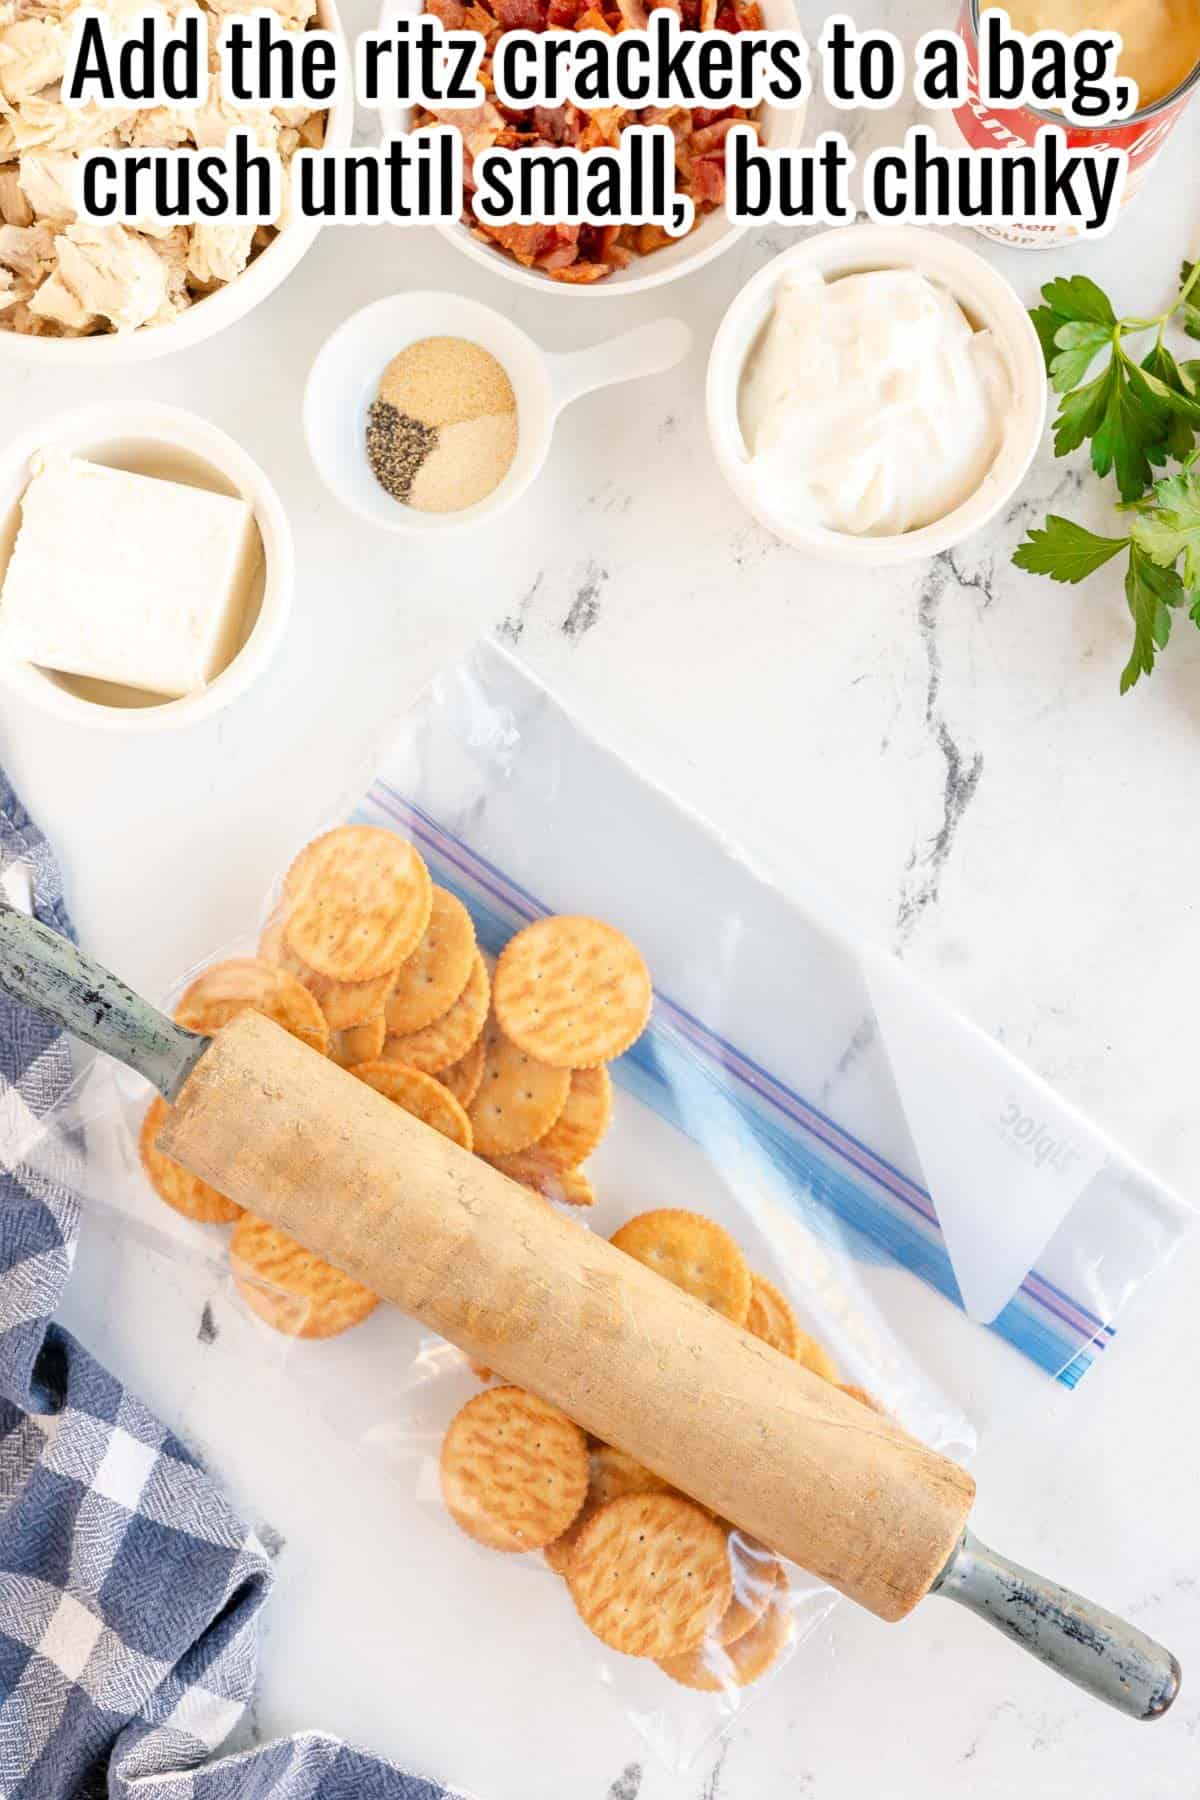 ritz crackers in a bag with a rolling pin over top.